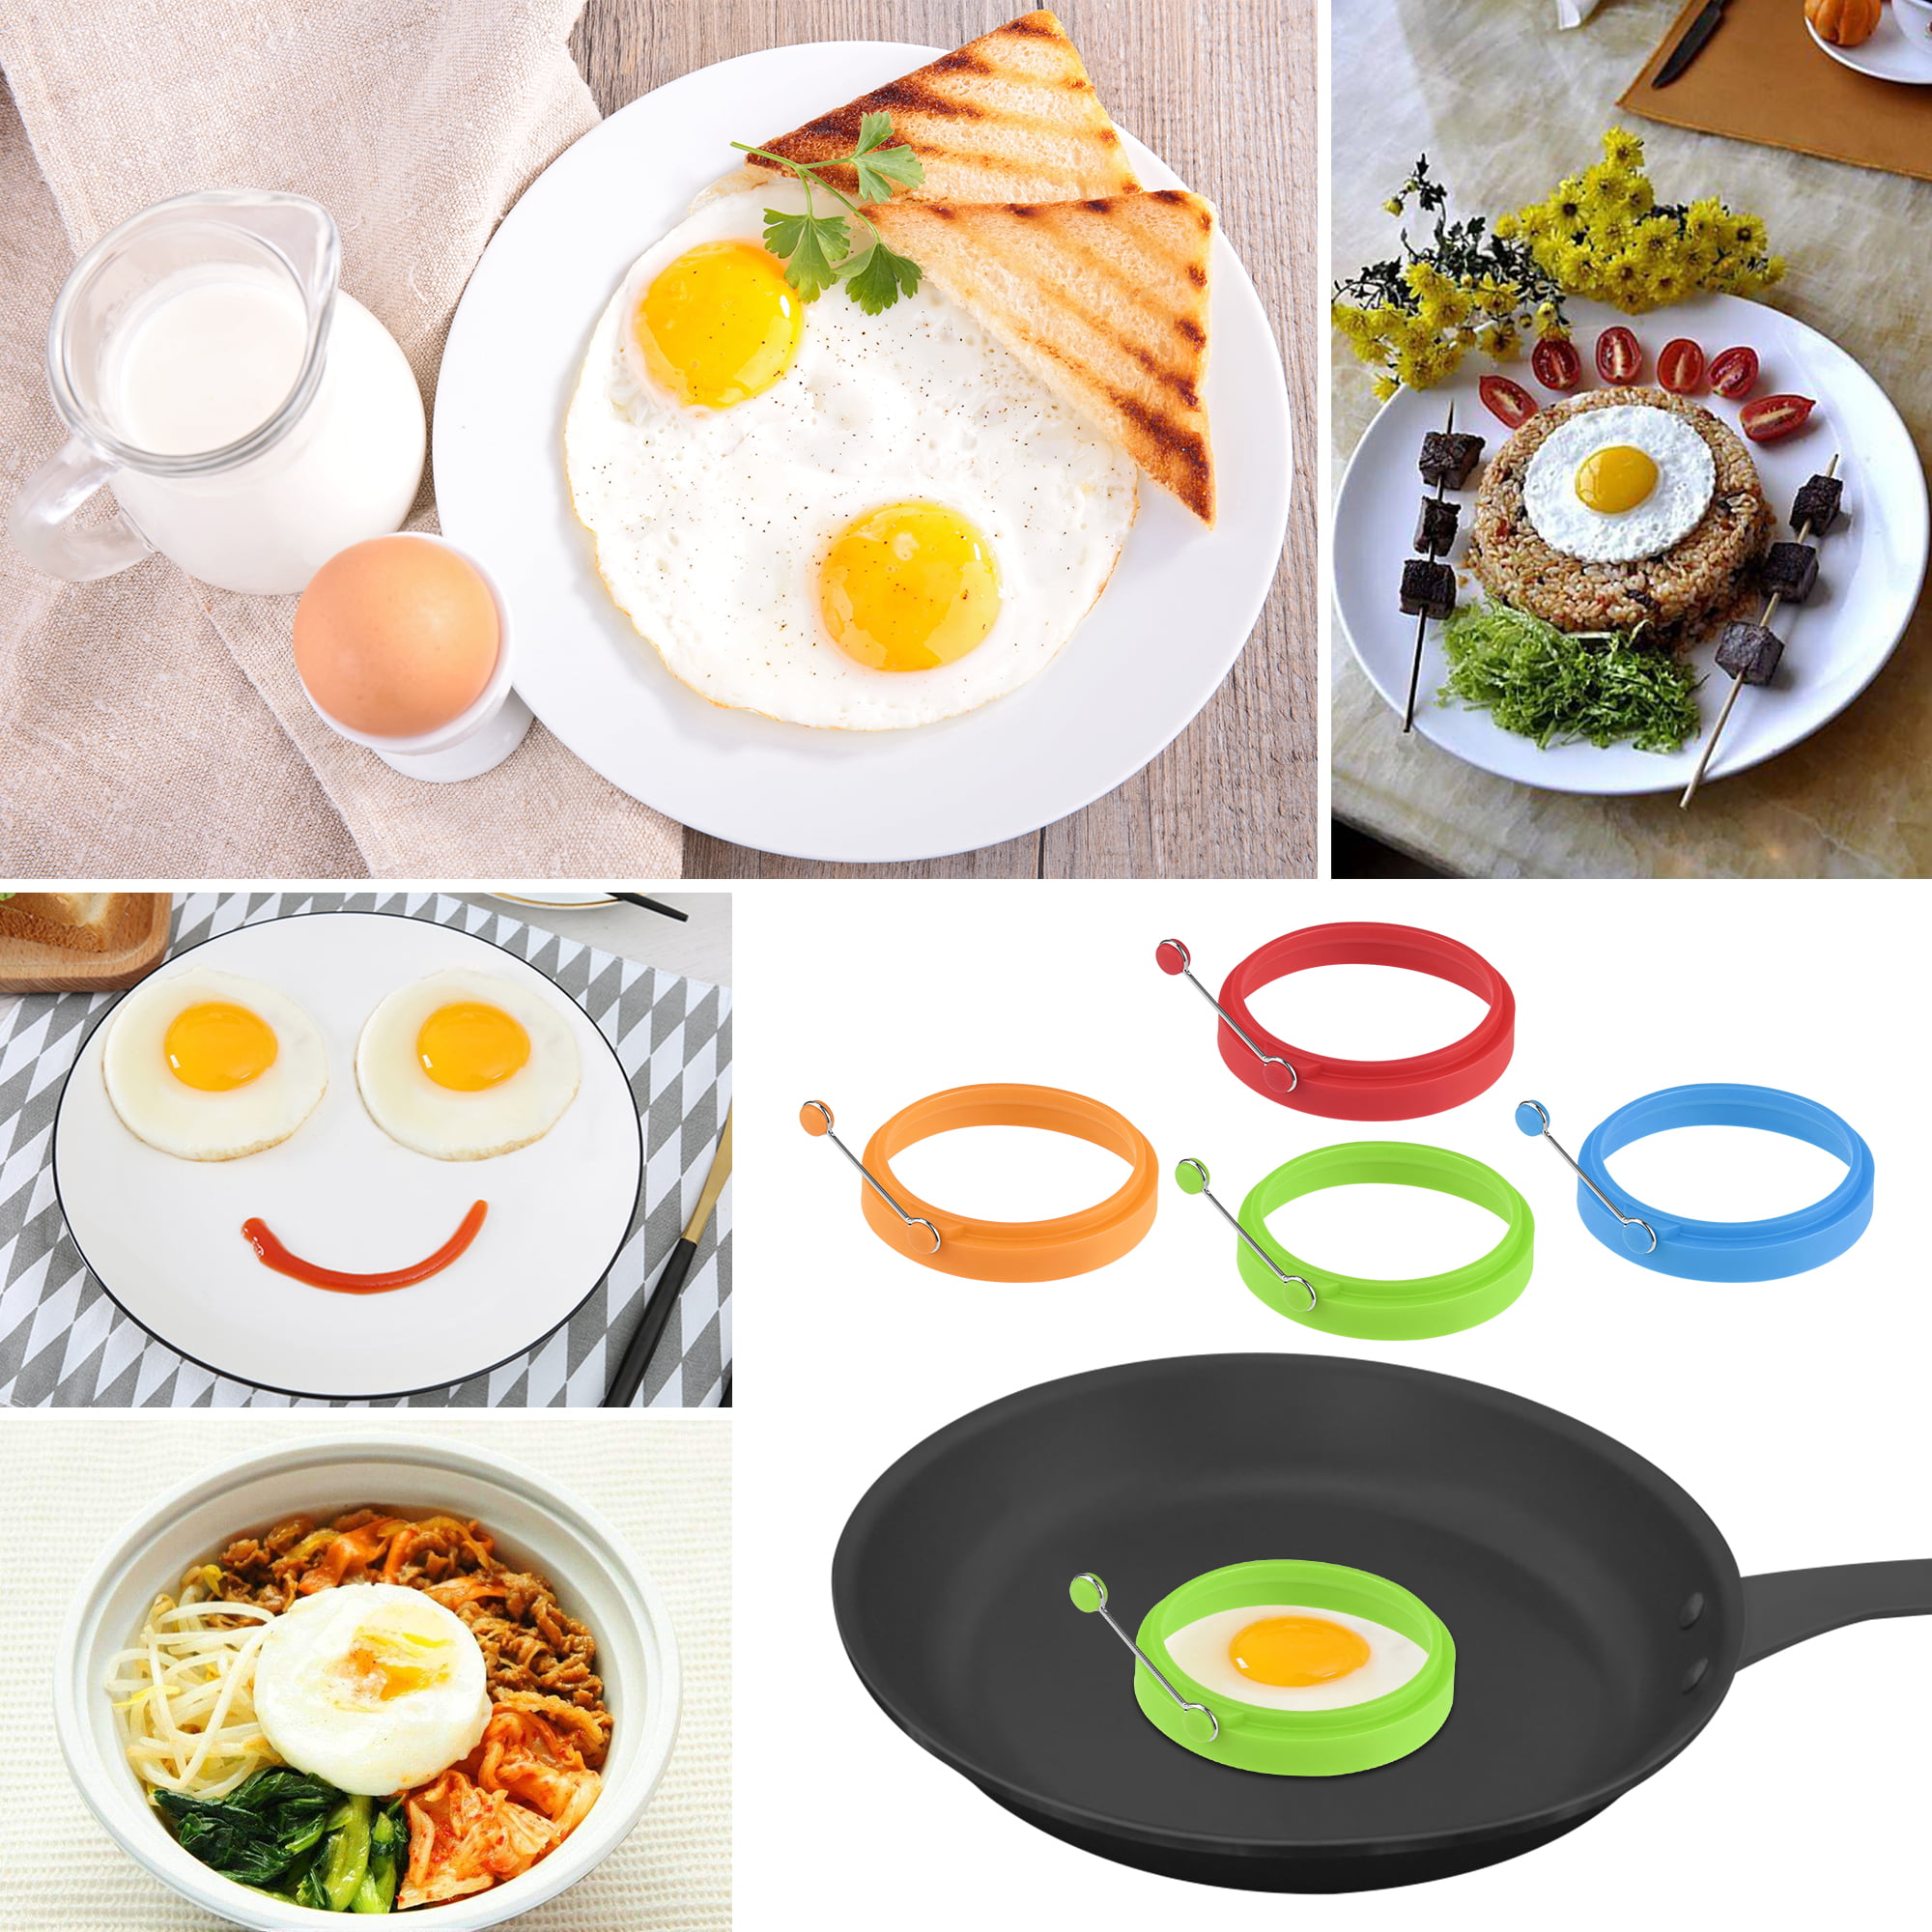 choyaxo 4 Pack Nonstick Egg Rings Stainless Steel Fried Egg Ring Griddle  with Orange Silicone Handle Professional Egg Patty Maker for Breakfast  Burger